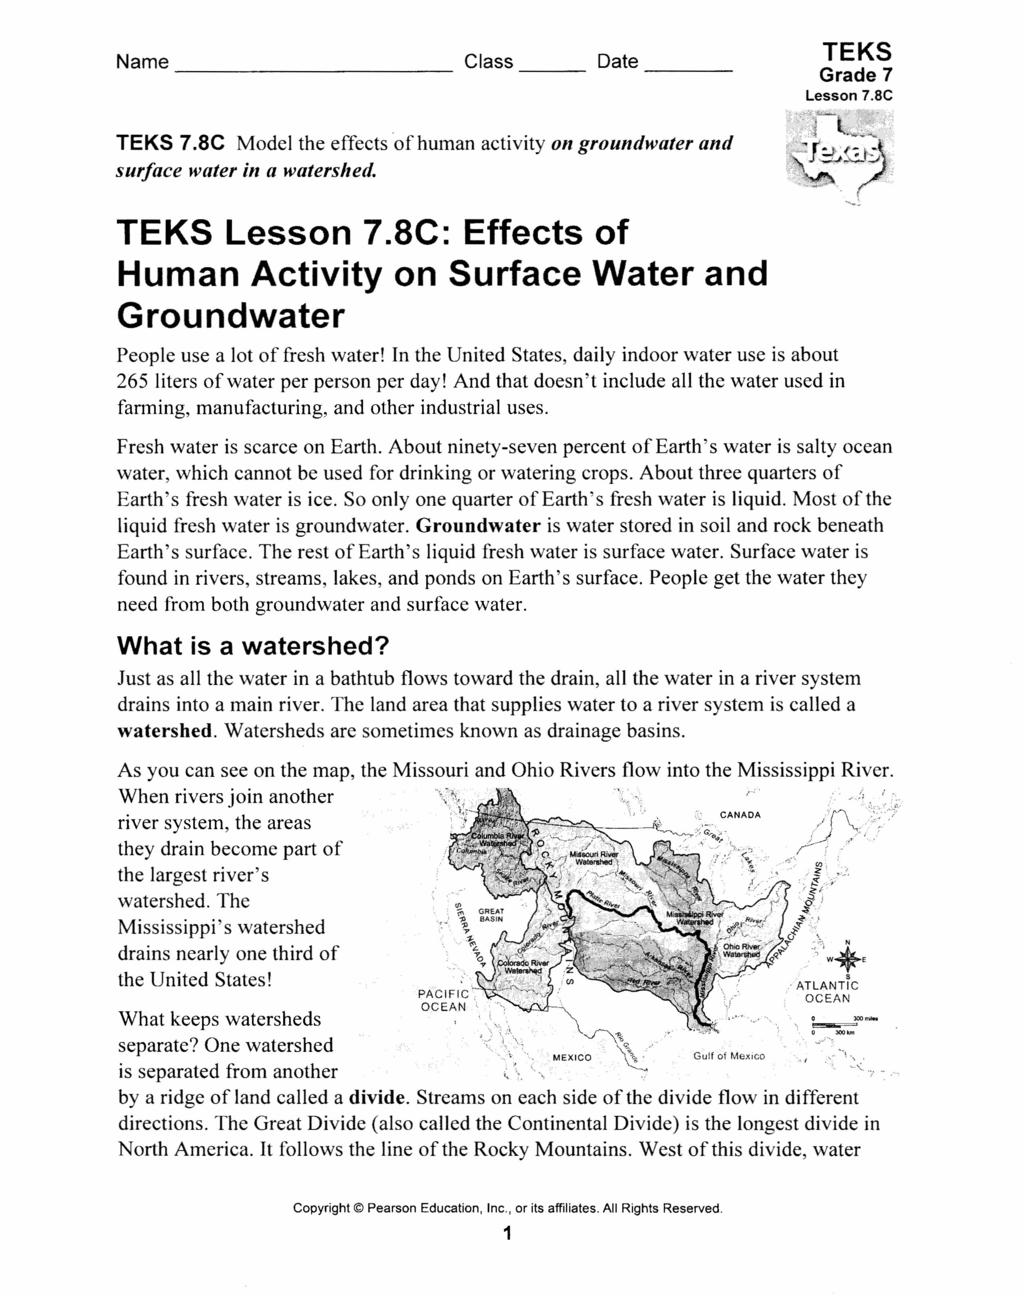 Class ----- Date -------- TEKS Lesson 7.SC TEKS 7.8e Model the effects of human activity on groundwater surface water in a watershed. and TEKS Lesson 7.